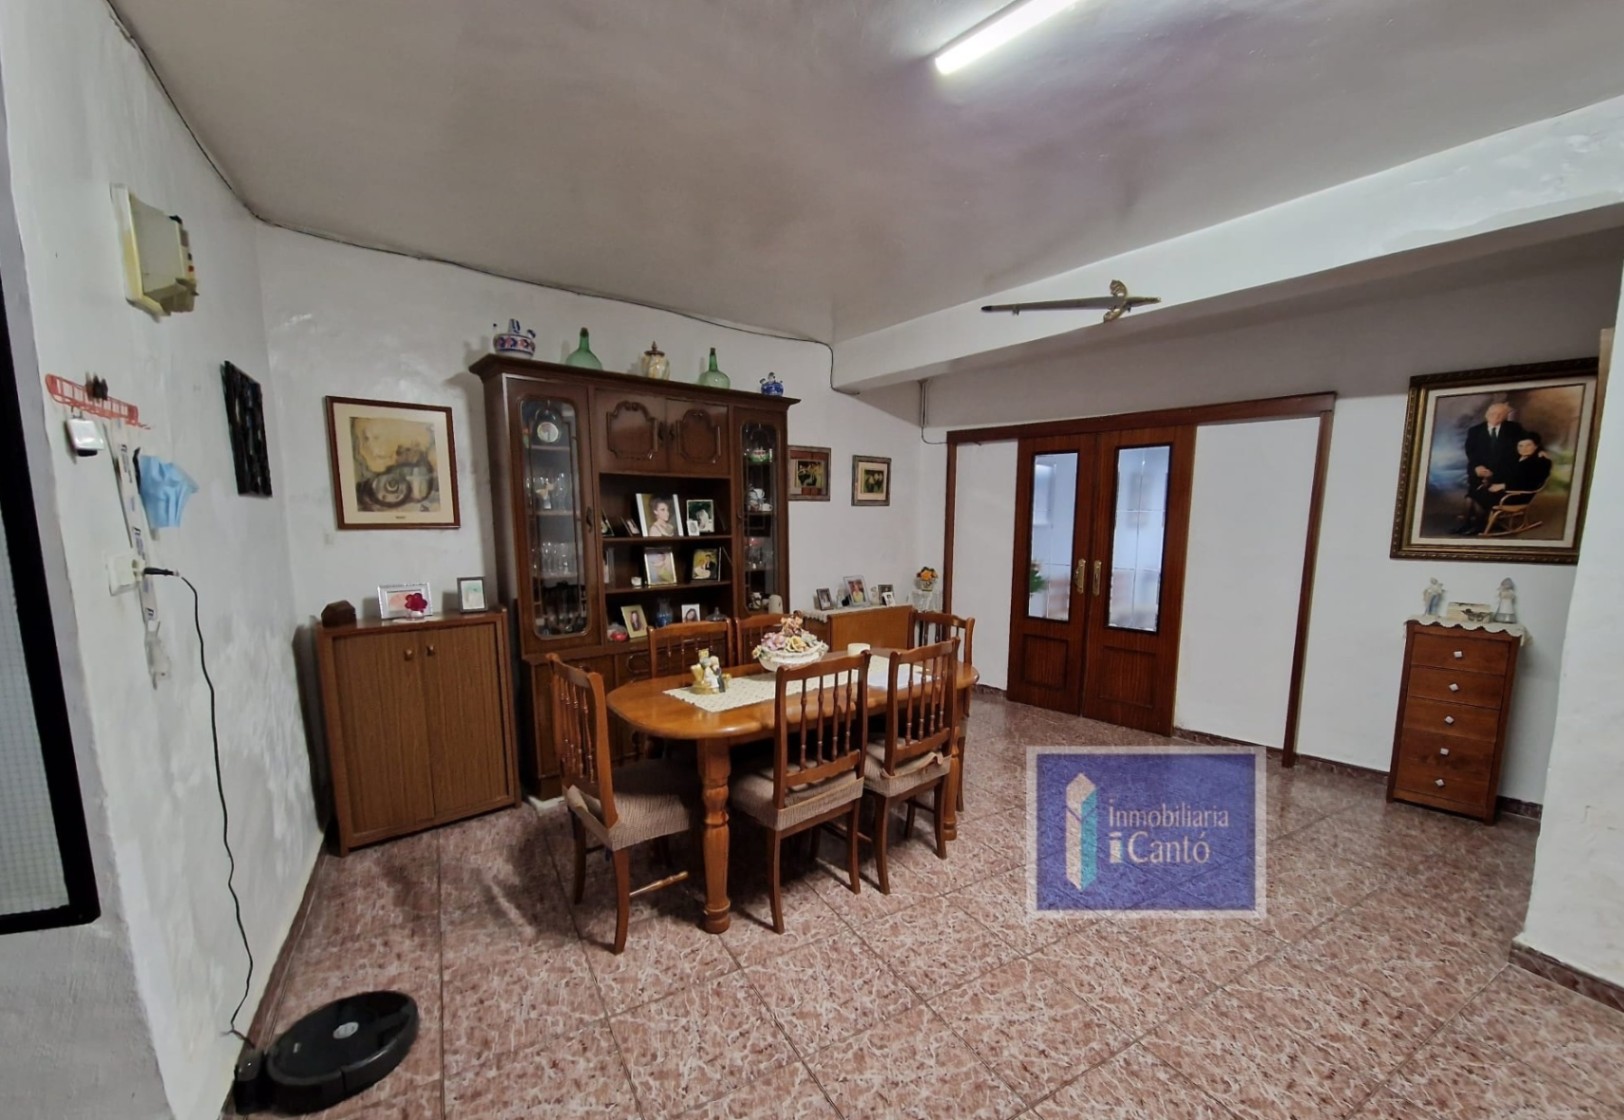 Detached House for sale in Cocentaina